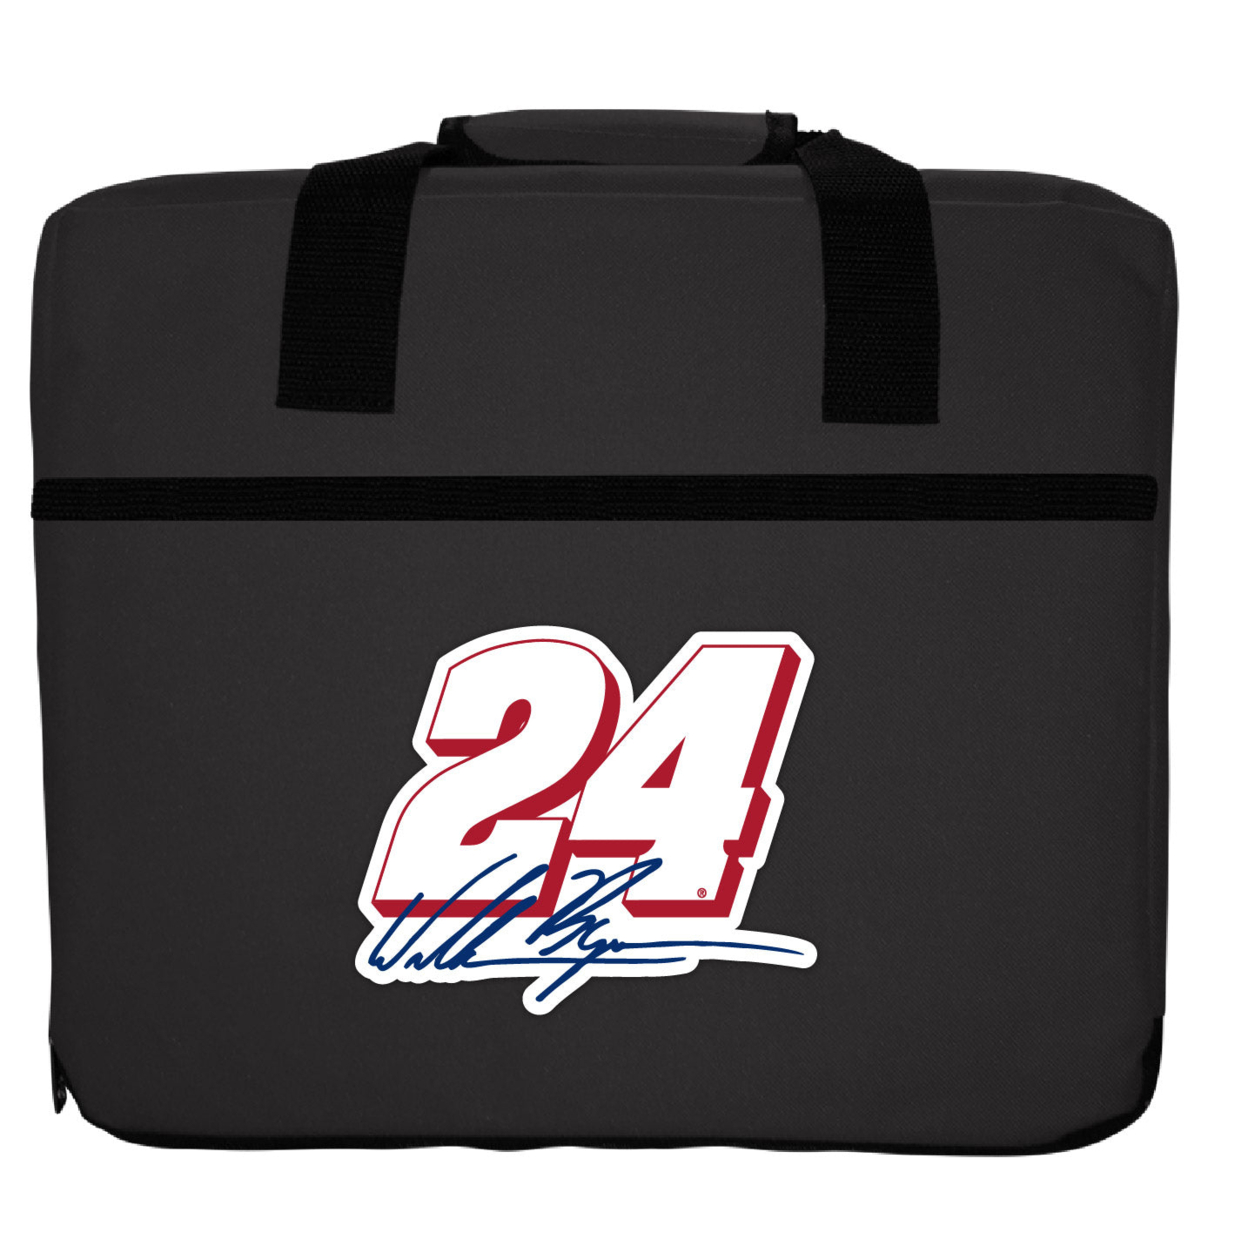 R And R Imports Officially Licensed NASCAR William Byron #24 Single Sided Seat Cushion New For 2020